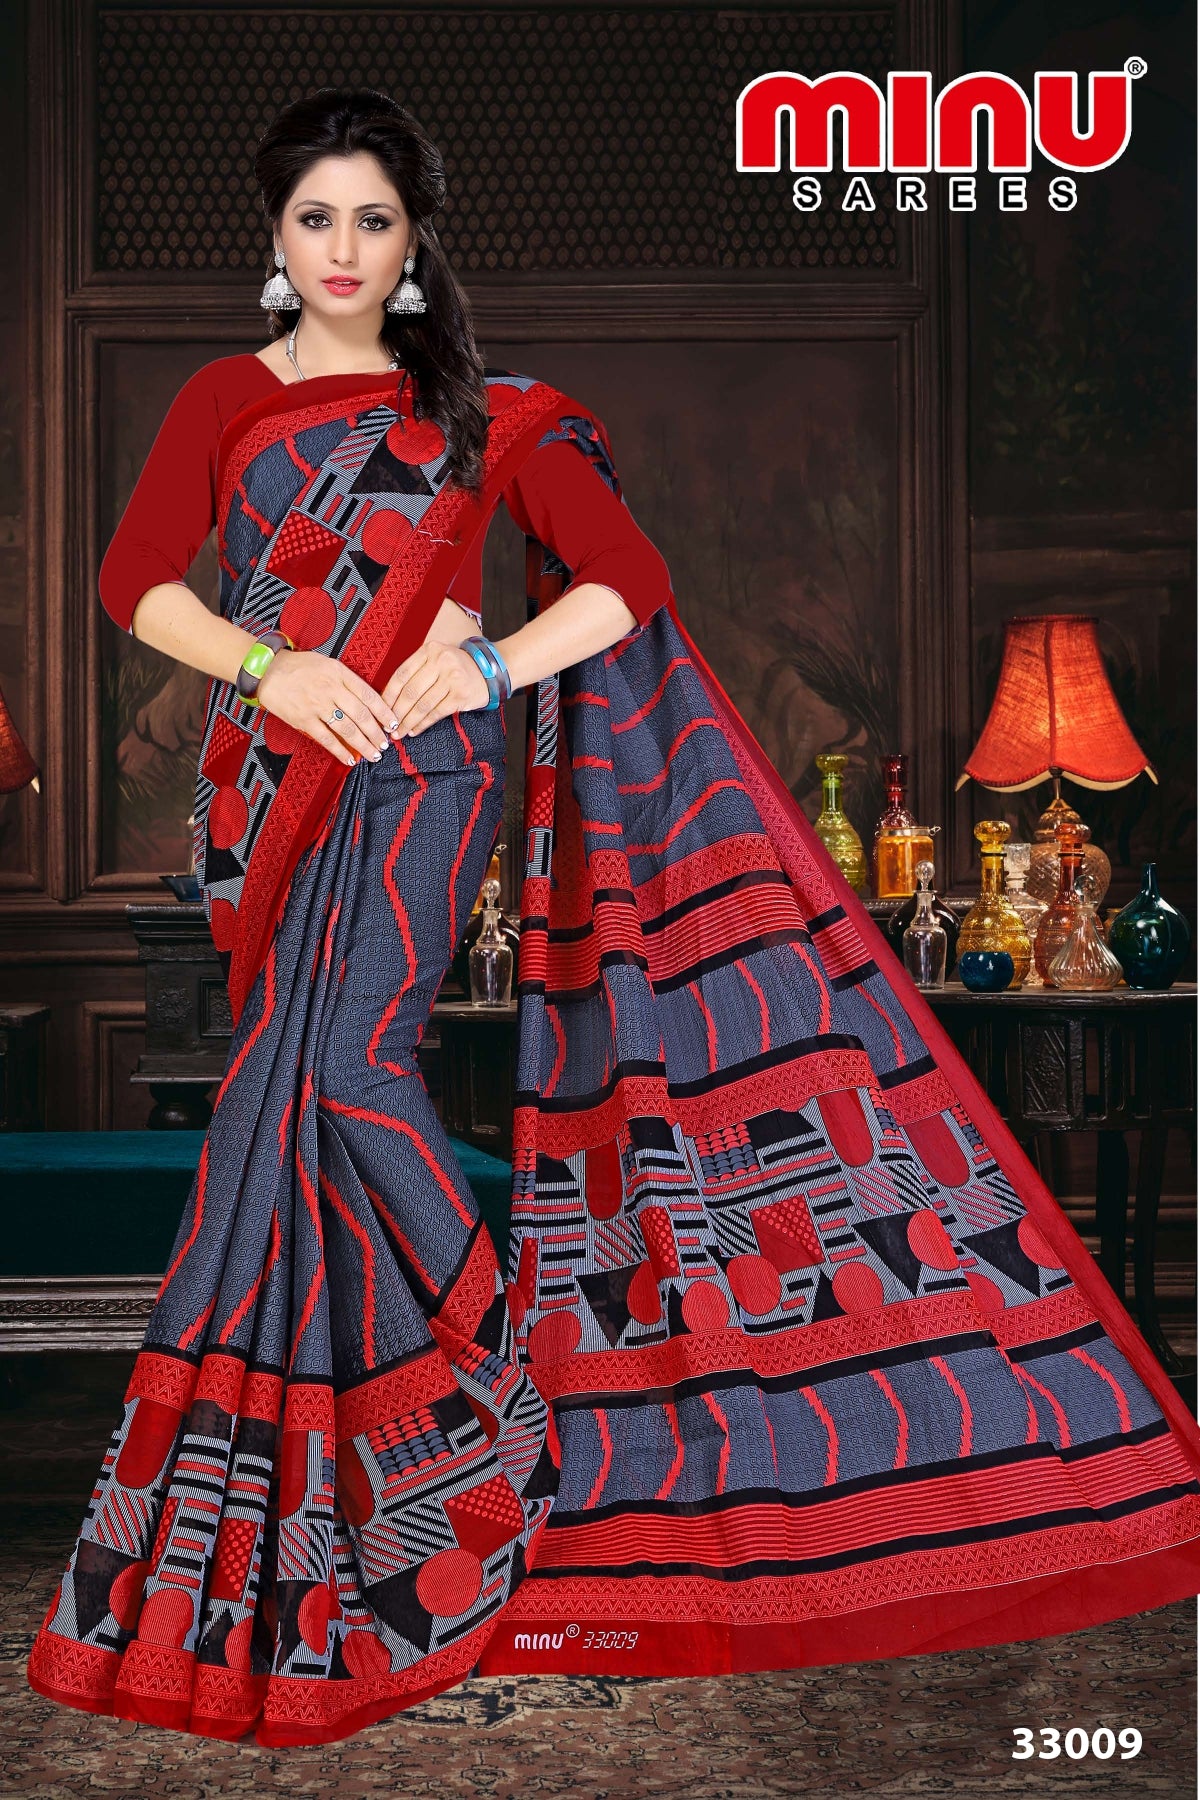 bold and classy cotton printed saree wearing woman